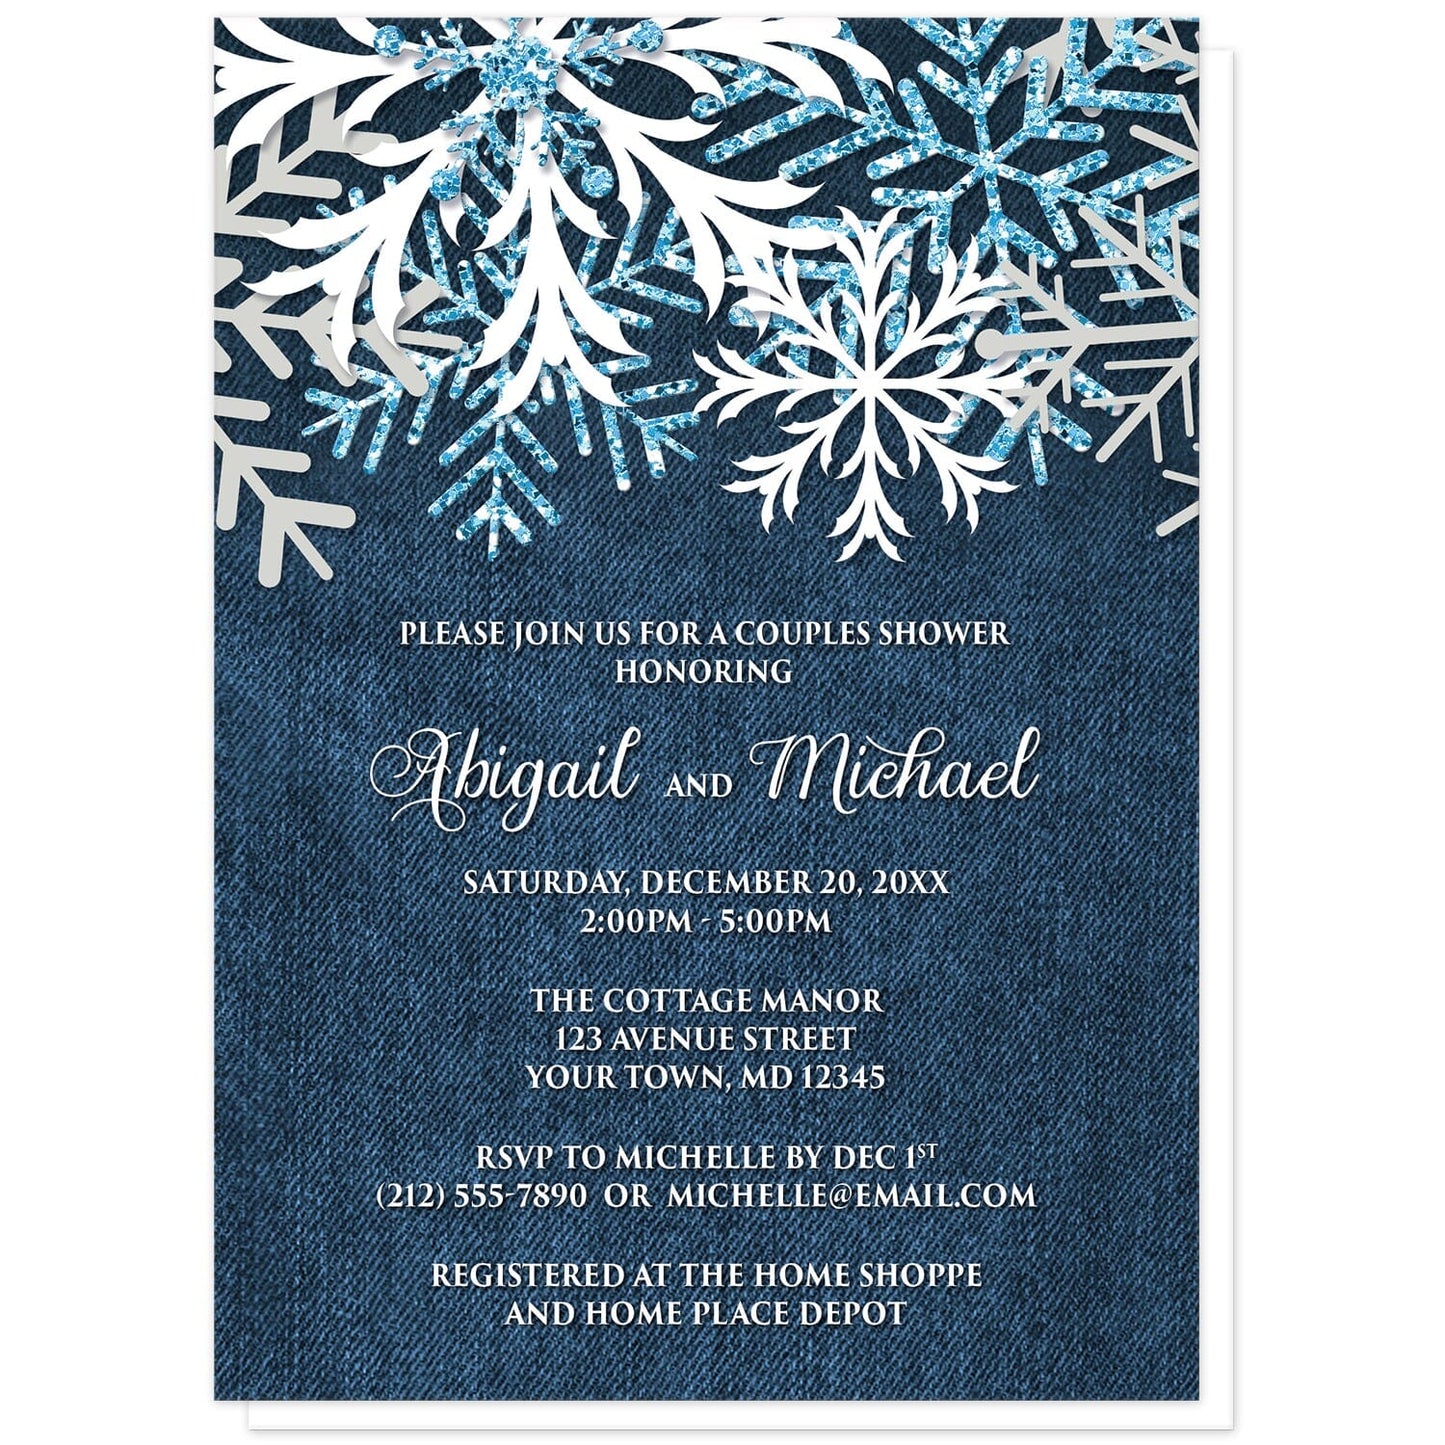 Rustic Snowflake Denim Winter Couples Shower Invitations at Artistically Invited. Rustic snowflake denim winter couples shower invitations with white, aqua blue glitter-illustrated, and light gray snowflakes along the top over a navy blue denim design. Your personalized couples shower celebration details are custom printed in white over the blue denim background below the pretty snowflakes.